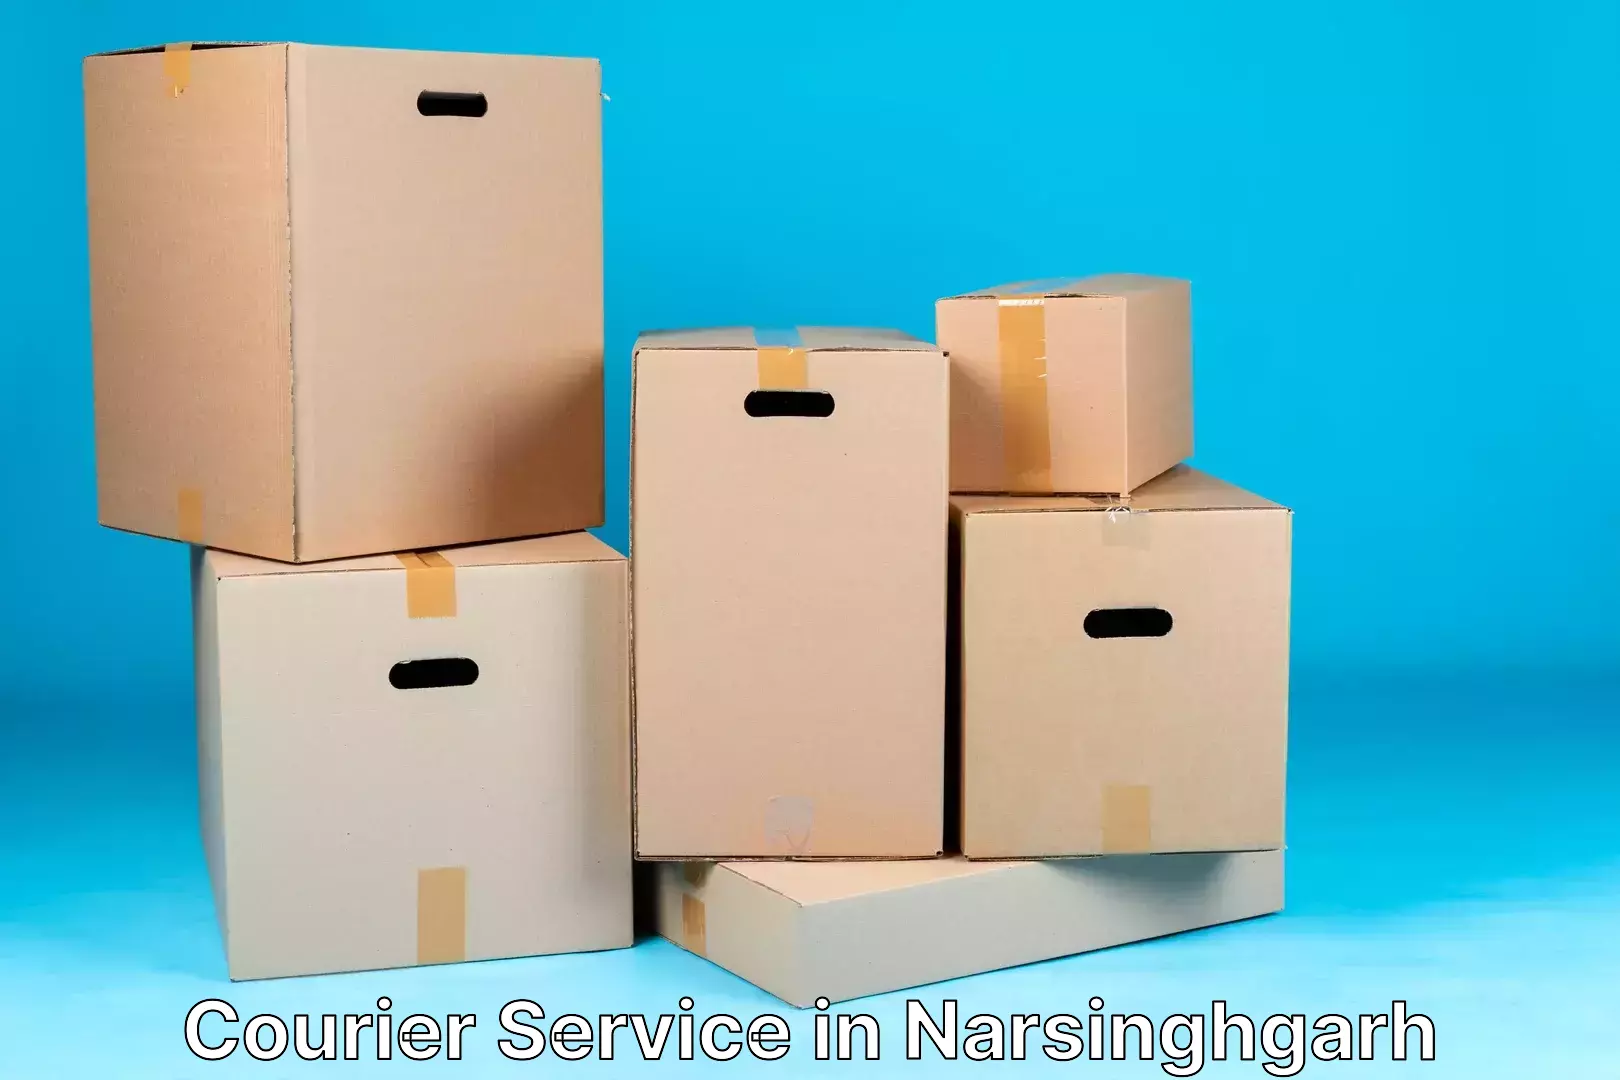 Easy access courier services in Narsinghgarh